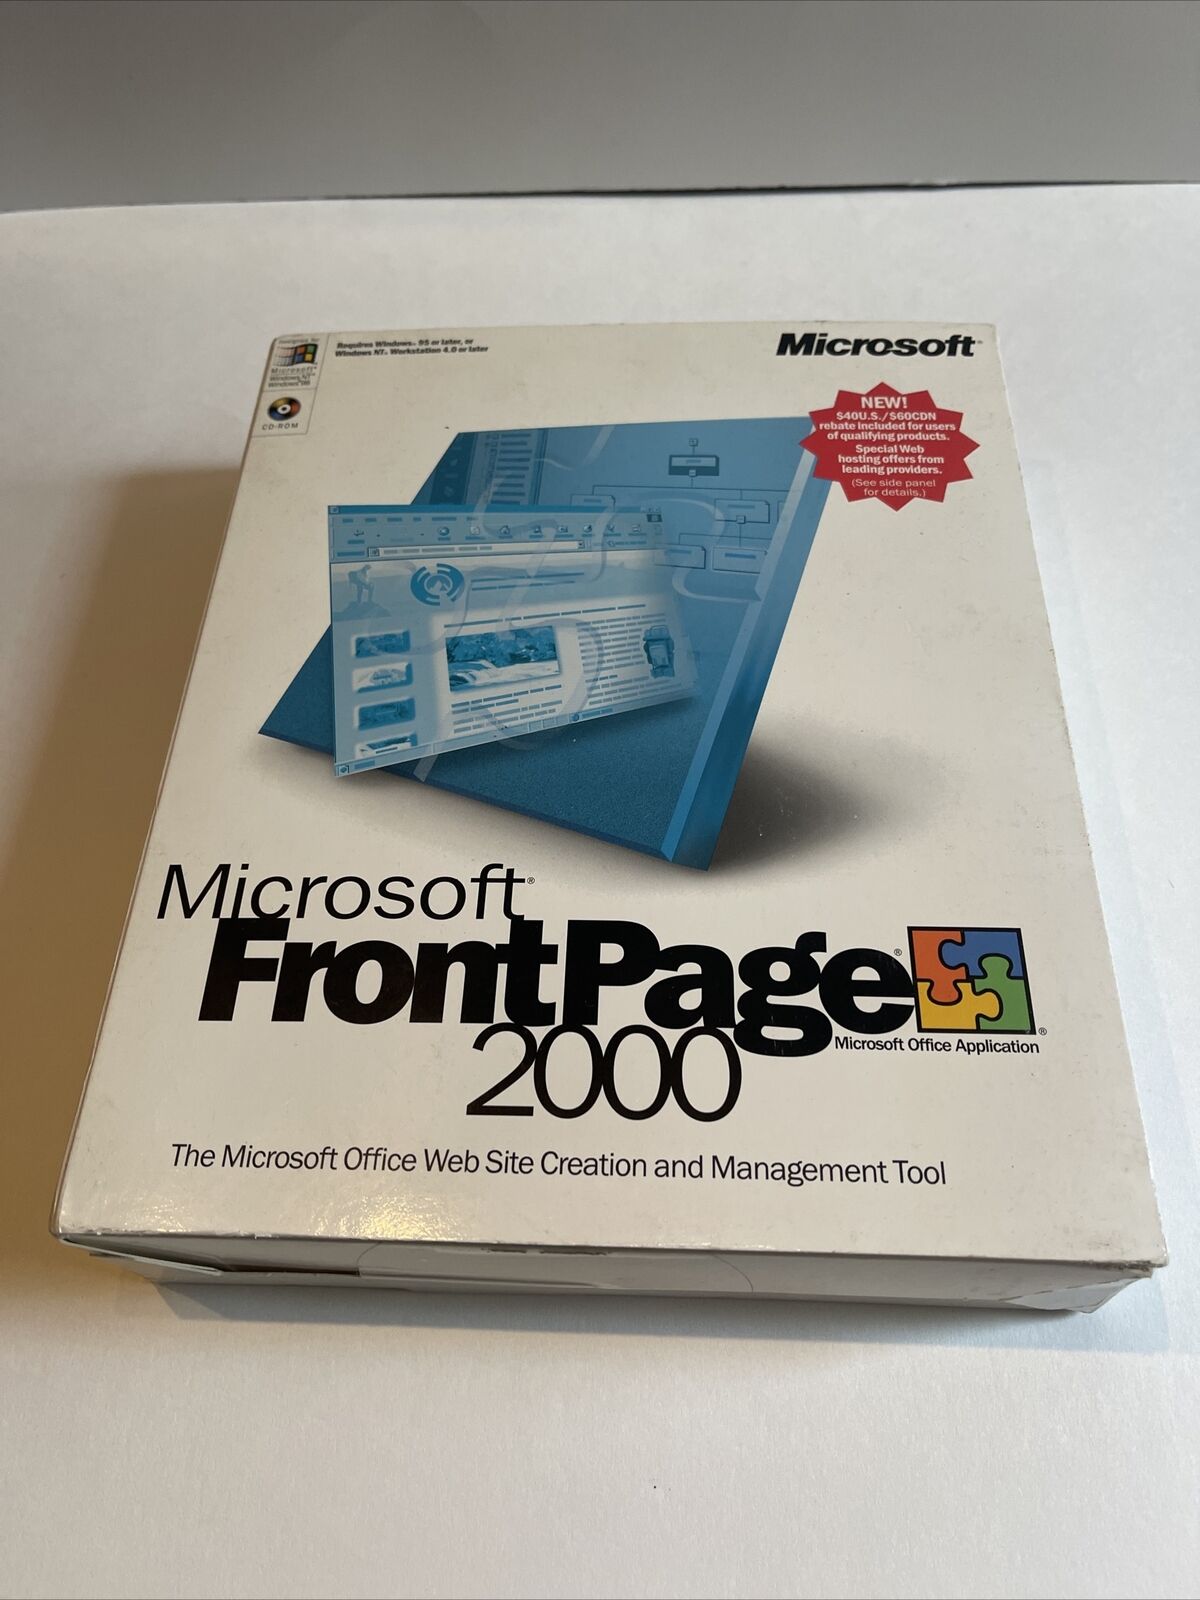 Microsoft FrontPage 2000CD-ROM/Windows 95 98 NT 2000*BRAND NEW SEALED-VINTAGE